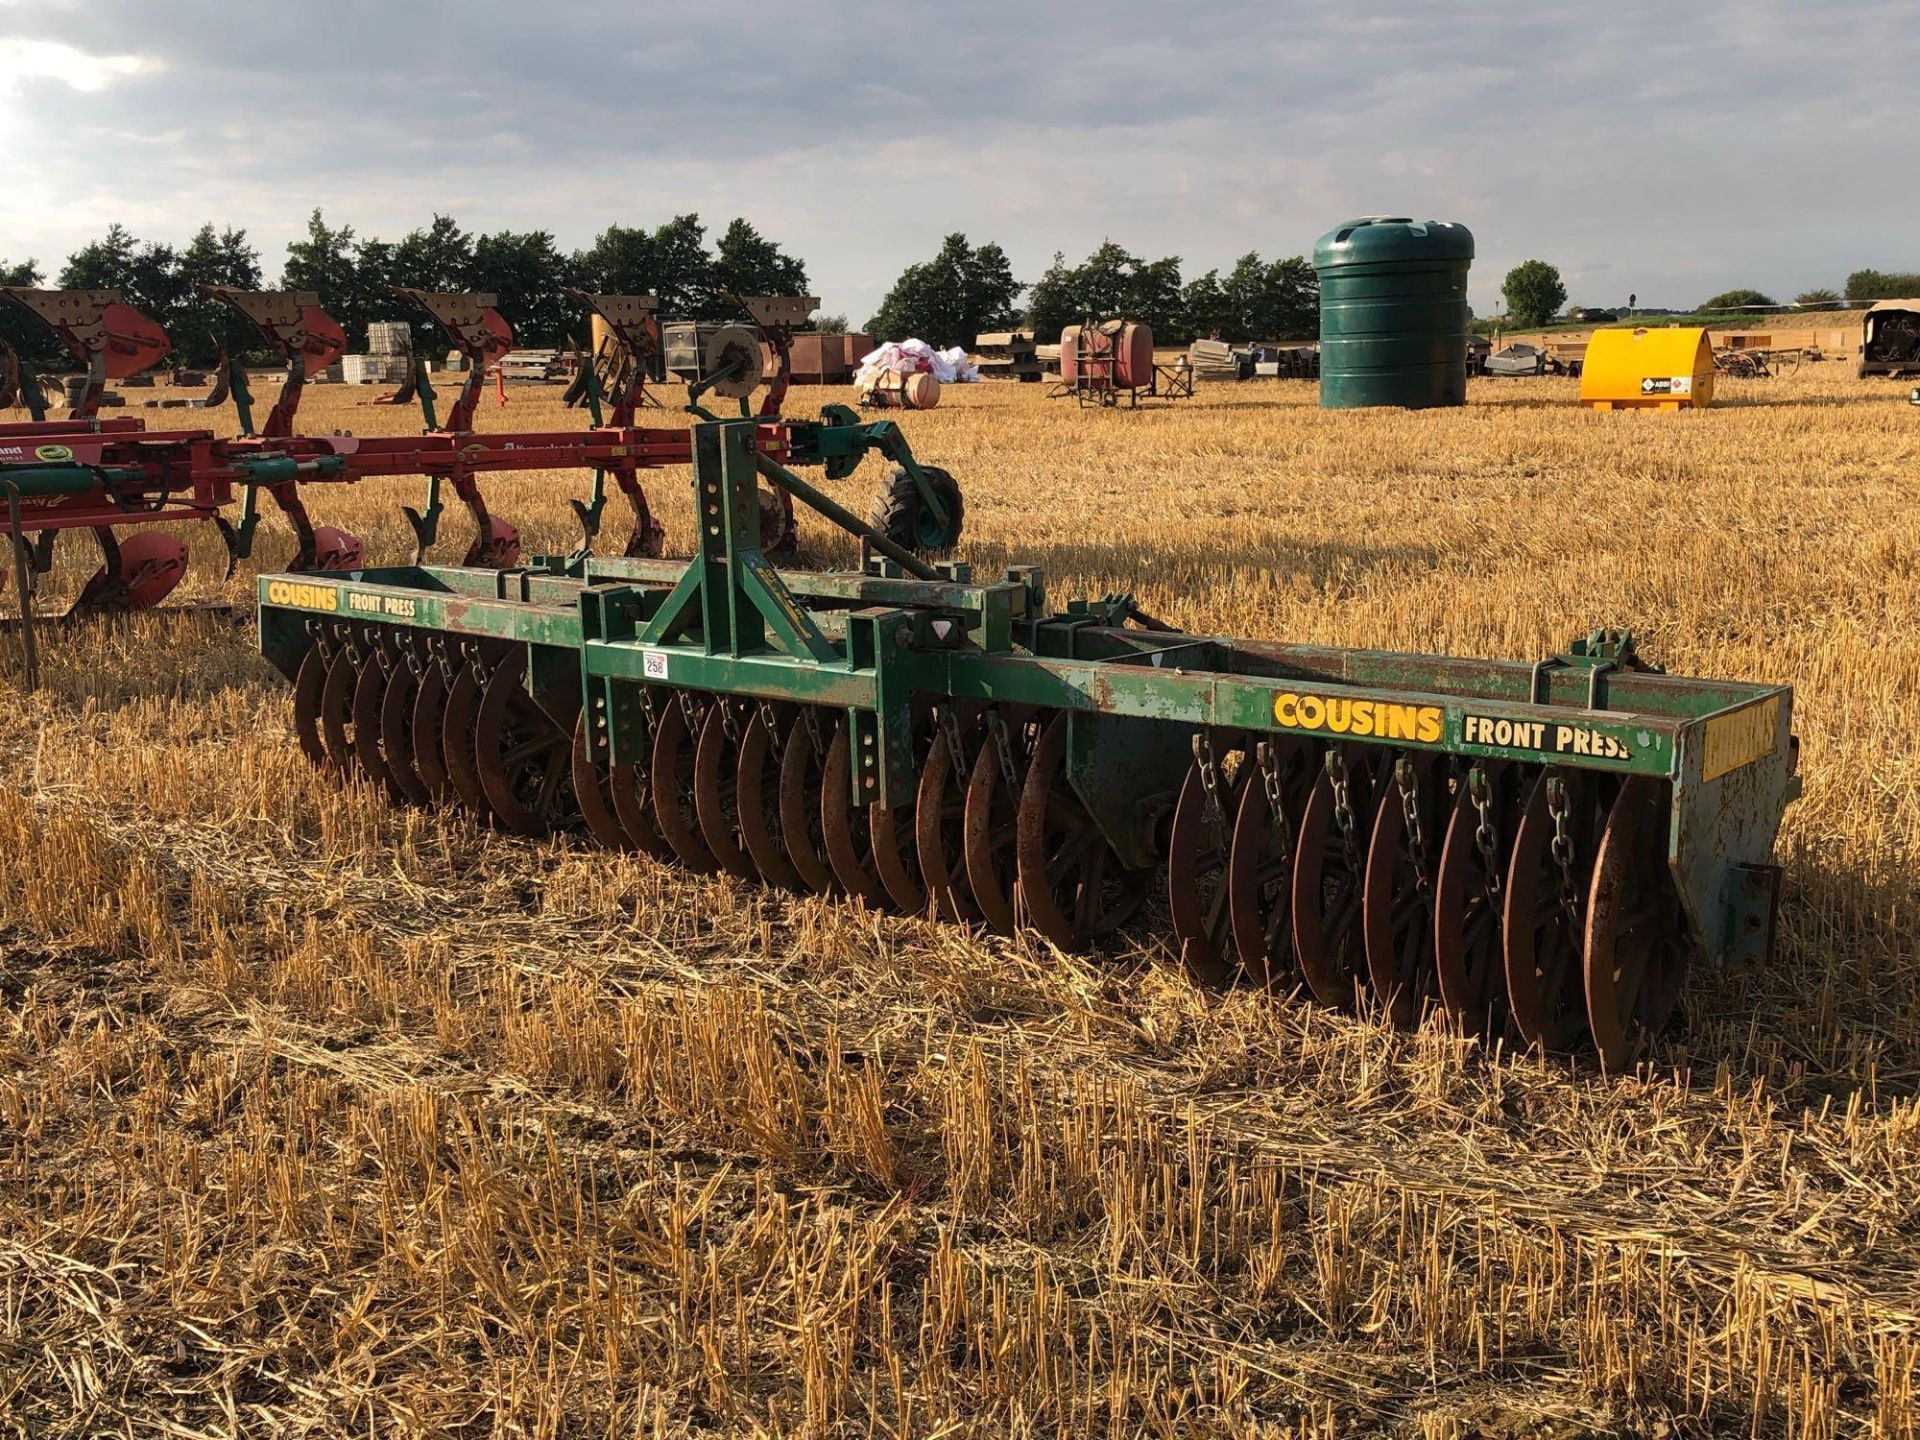 1995 Cousins 4.5m front press with springtines and press wheels. Serial No: 93474 - Image 2 of 8